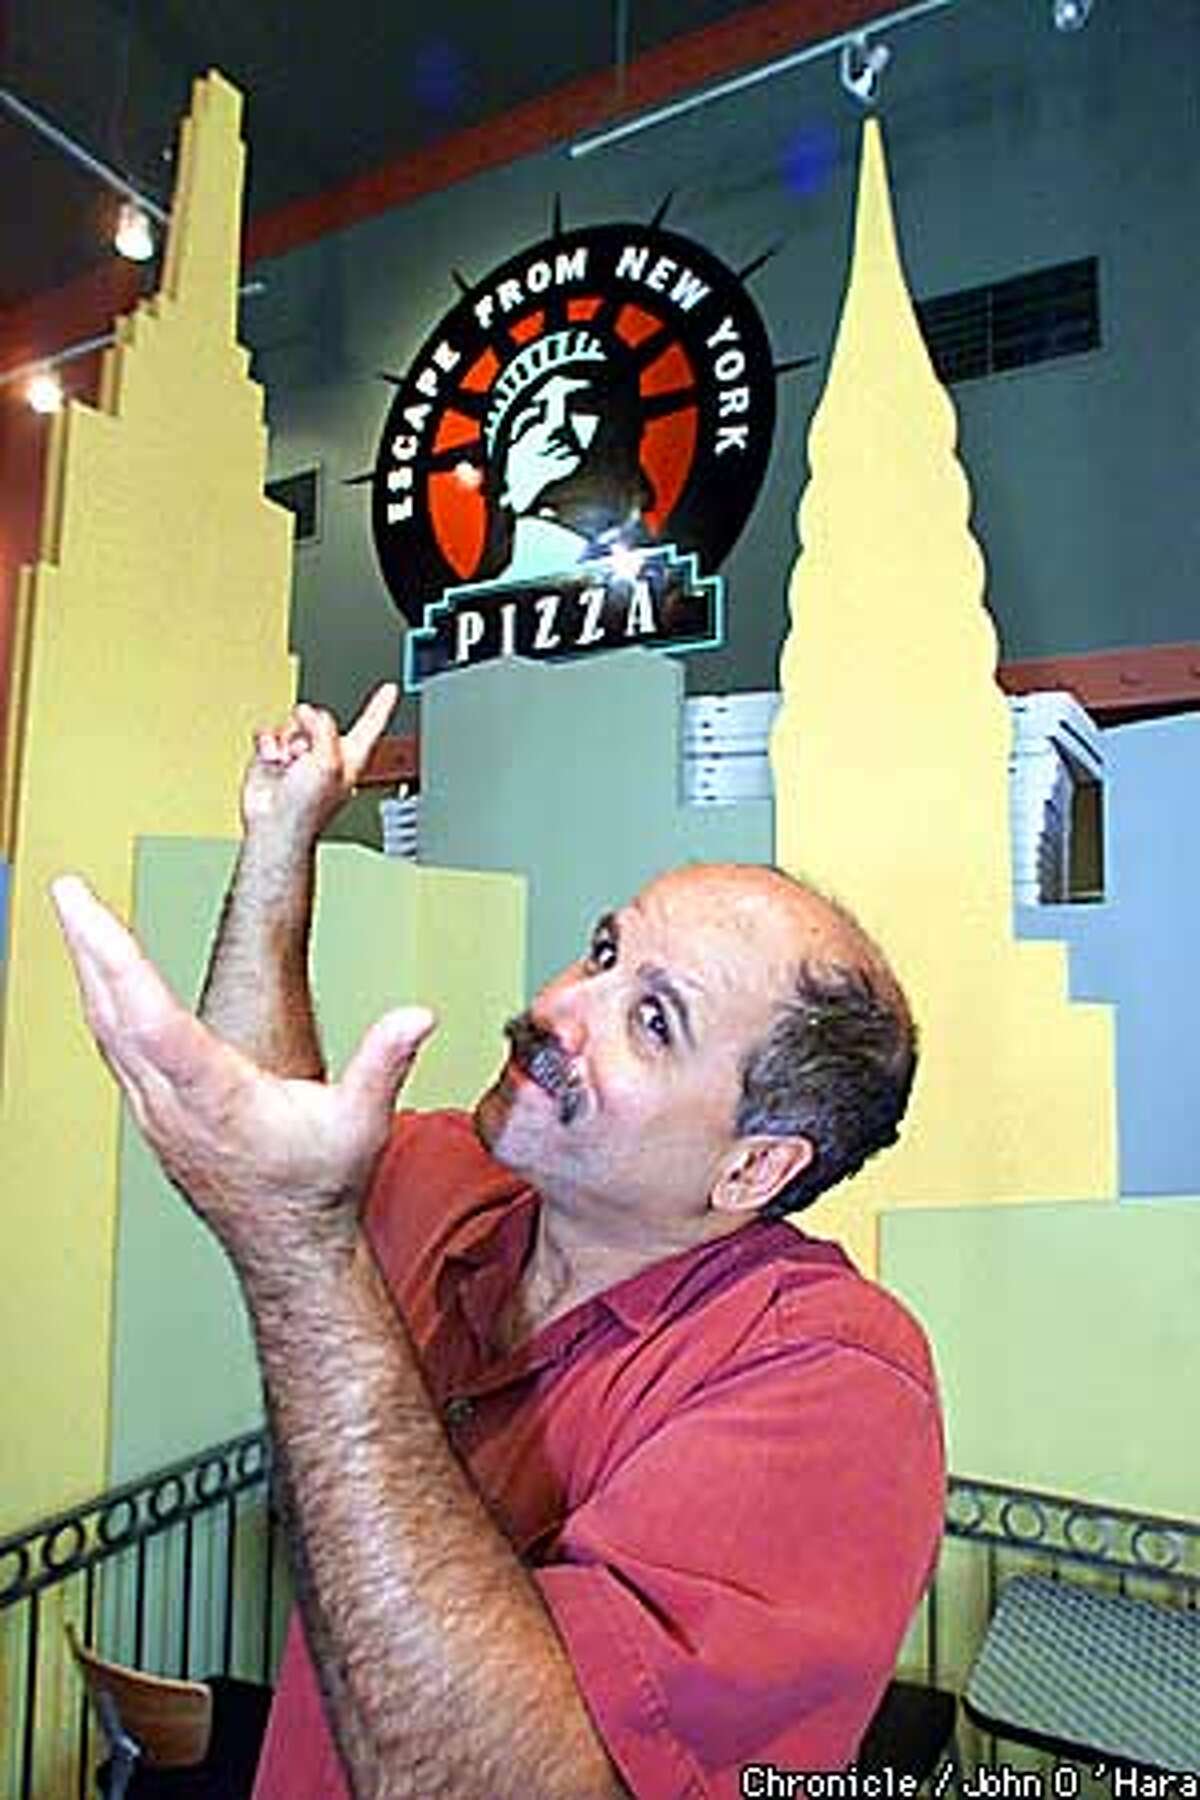 "Escape from New York Pizza", 333 Bush St. San Francisco, CA Paul Geffner, has been in the pizza business for 13 years. A resturant at Haight and Shrader Sts. (13 yrs), Castro & 18th Sts. (10 yrs), and 333 Bush St. (3 yrs). Photo/John O'Hara.